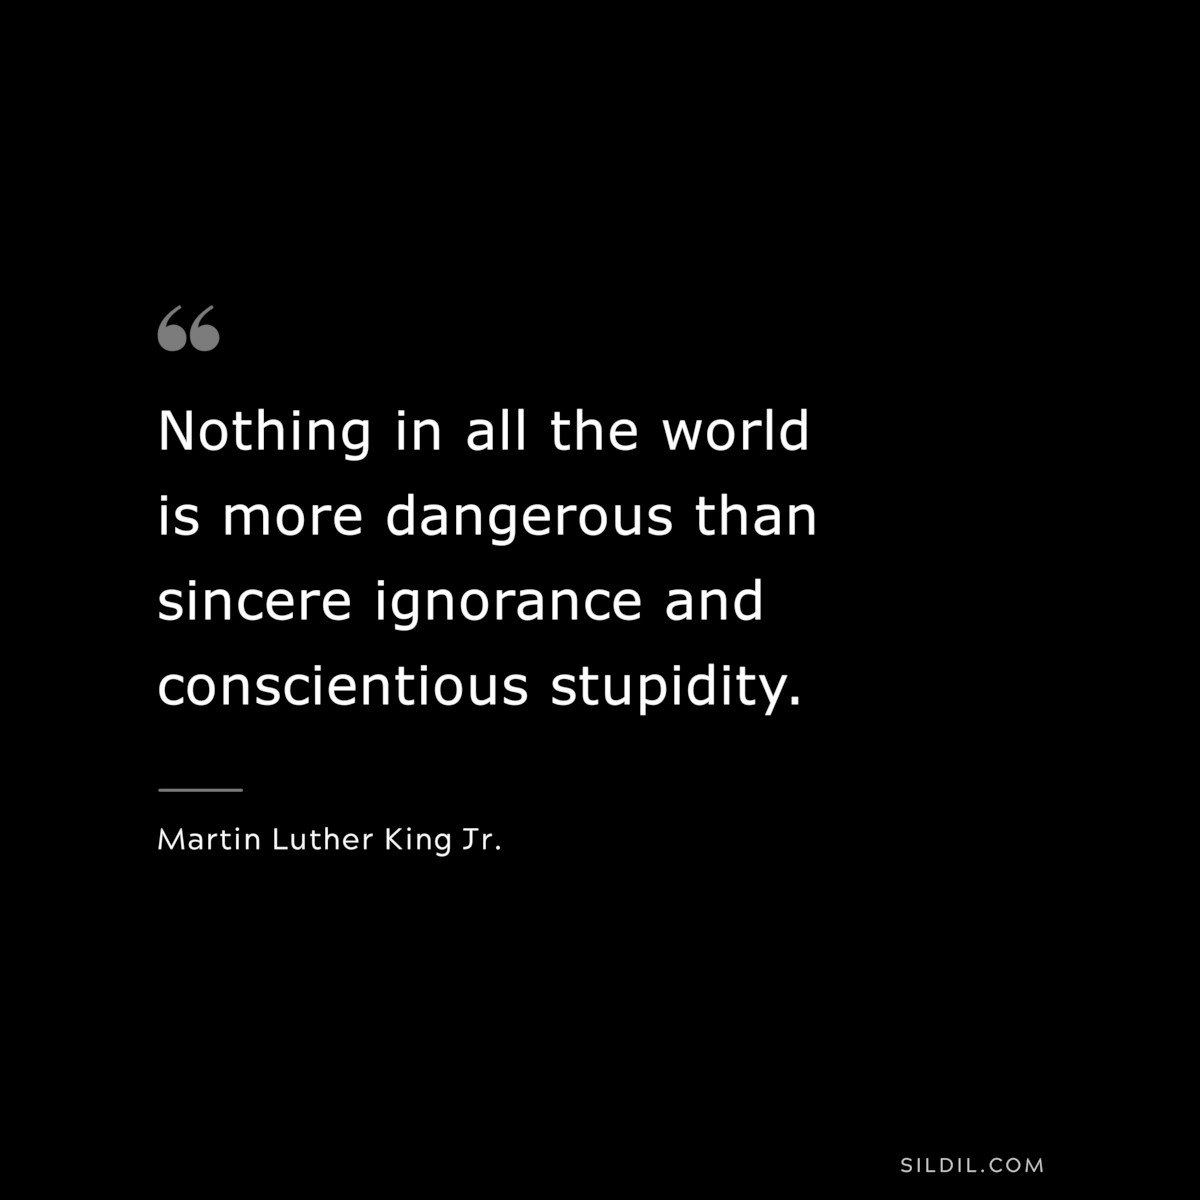 Nothing in all the world is more dangerous than sincere ignorance and conscientious stupidity. ― Martin Luther King Jr.